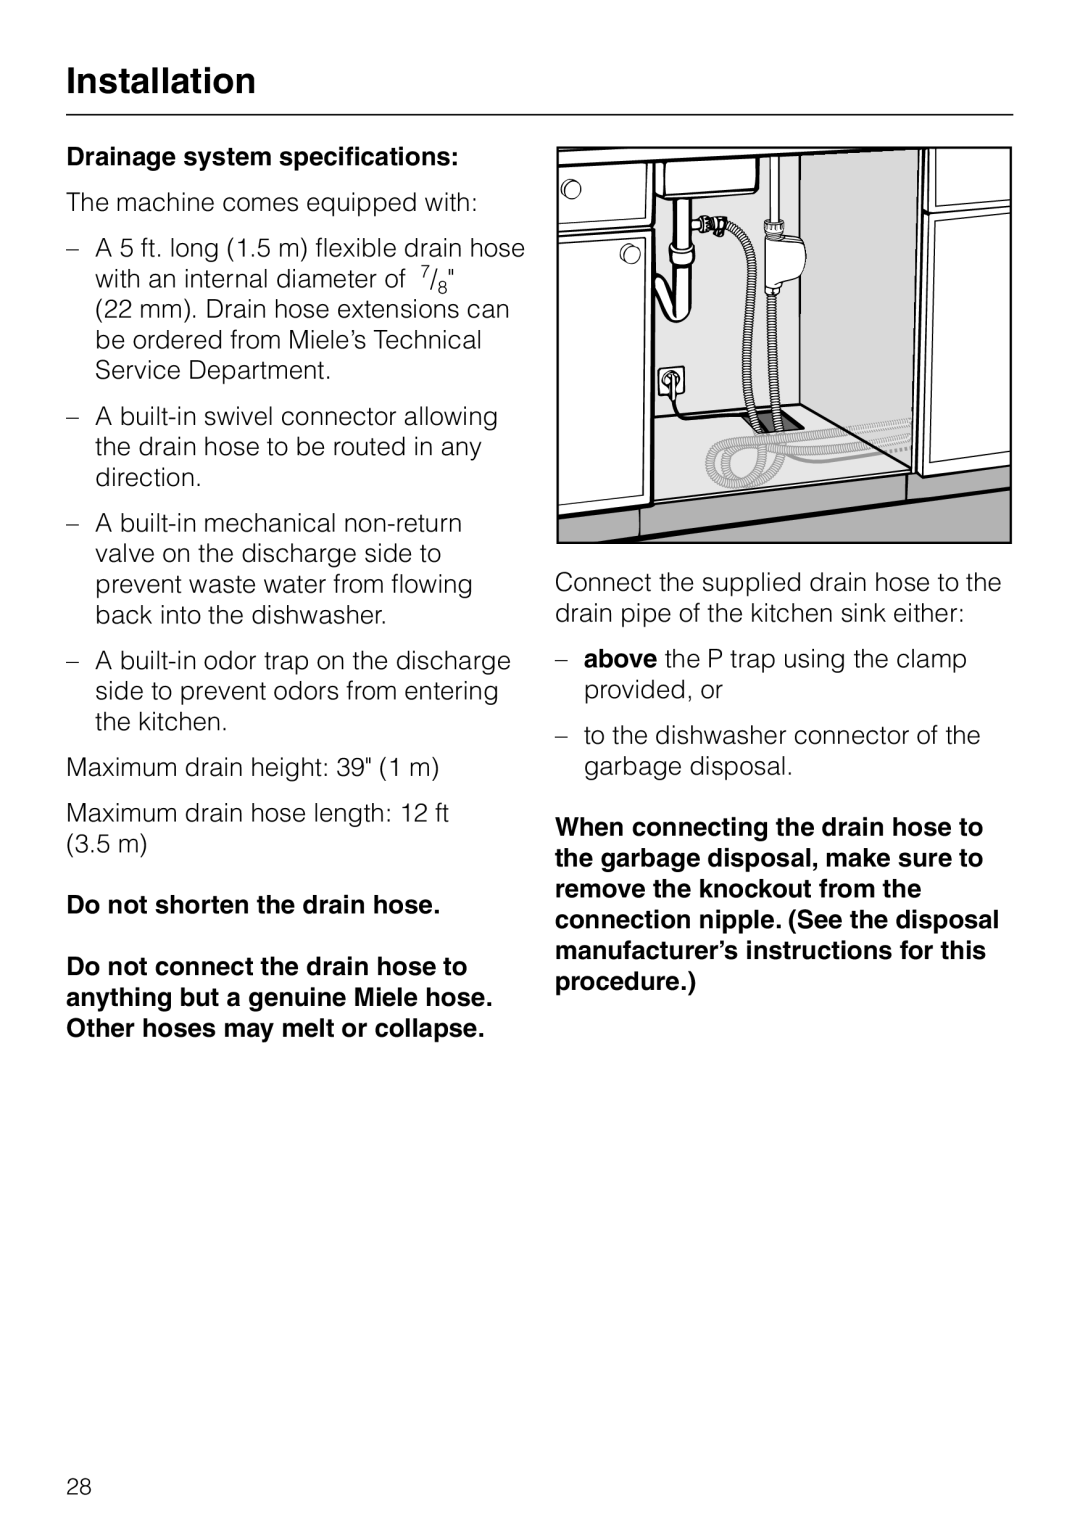 Miele HG01 installation instructions Drainage system specifications, Do not shorten the drain hose, Installation 